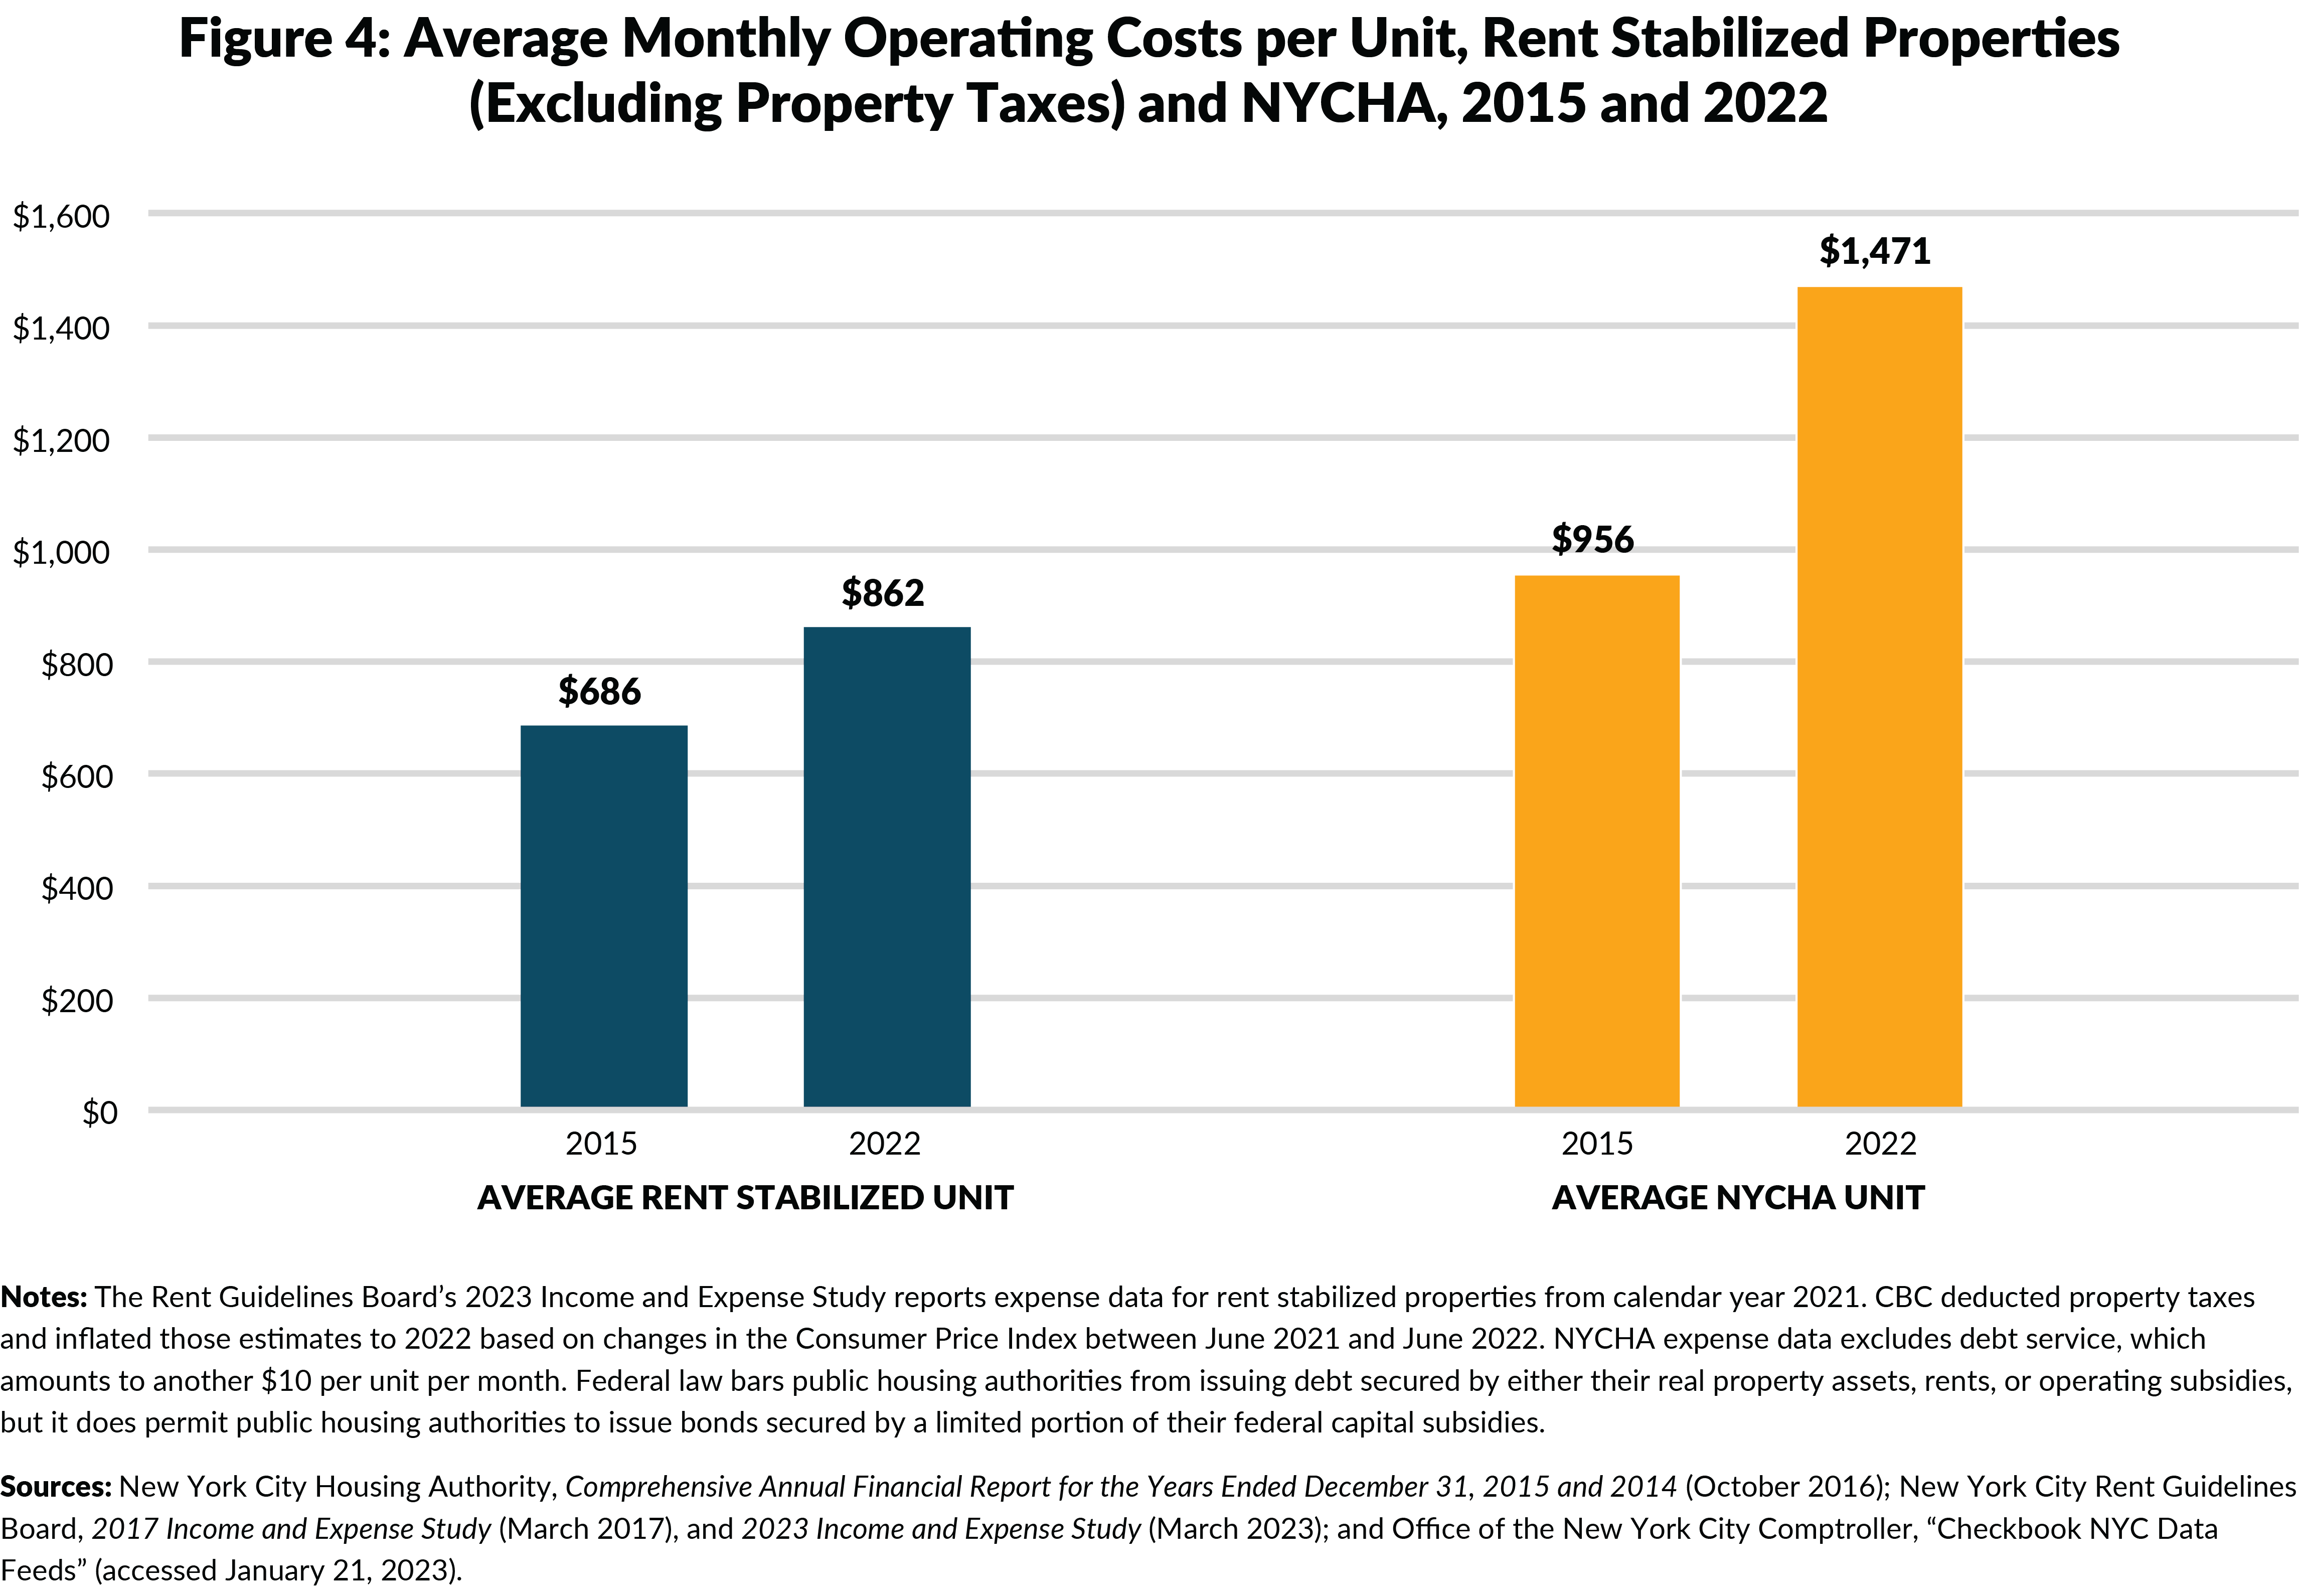 Figure 4: Average Monthly Operating Costs per Unit, Rent Stabilized Properties(Excluding Property Taxes) and NYCHA, 2015 and 2022